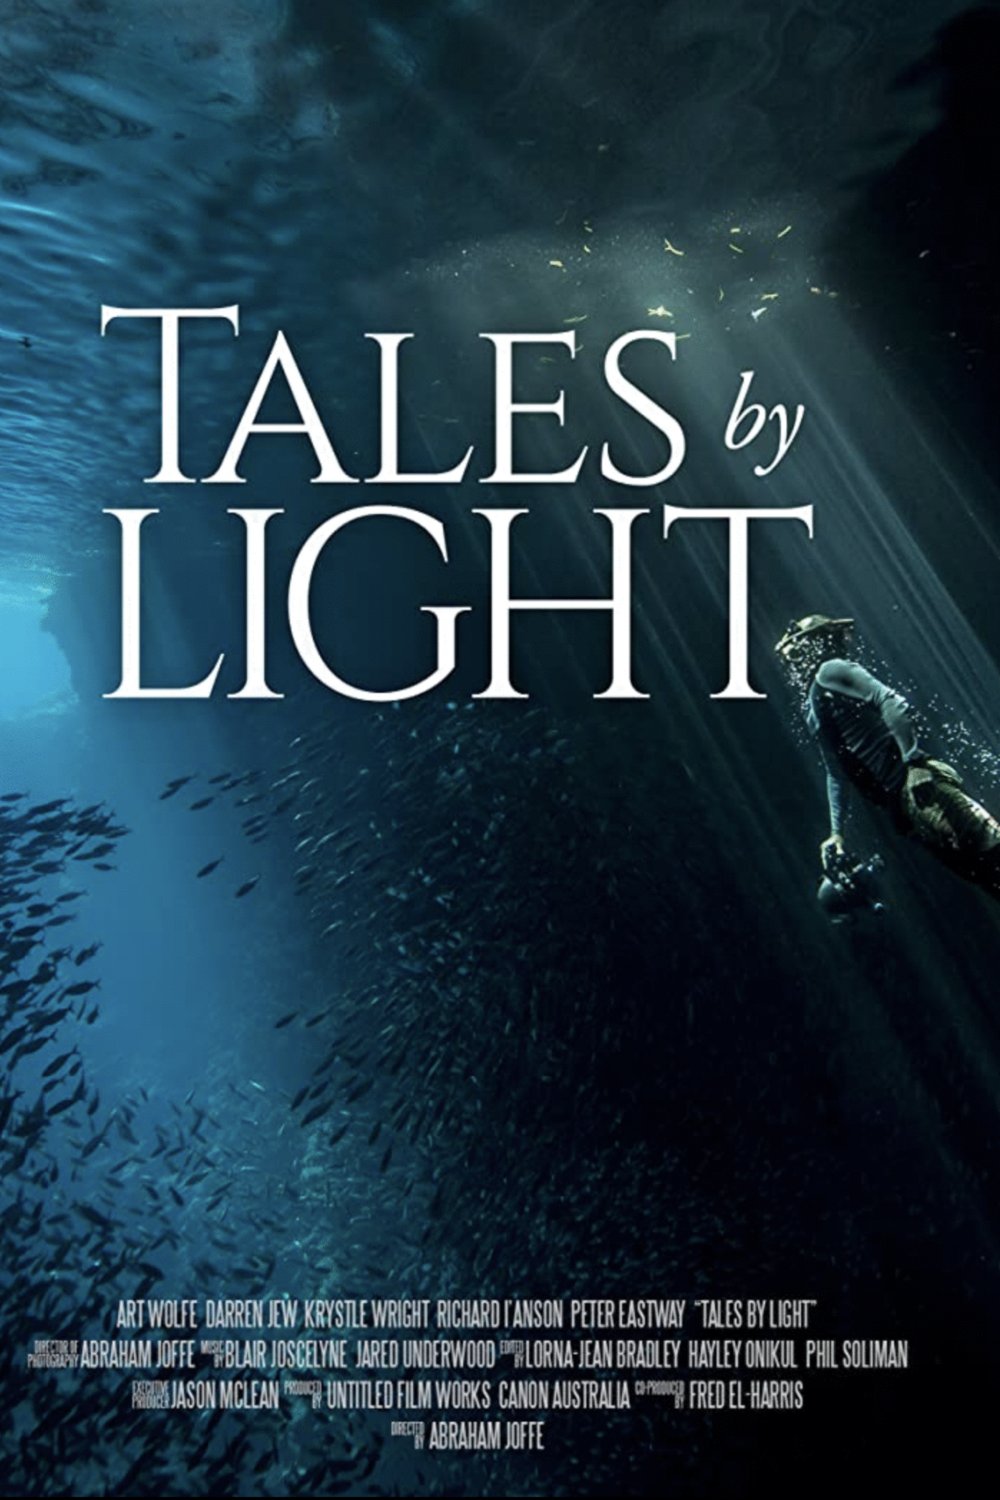 Poster of the movie Tales by Light